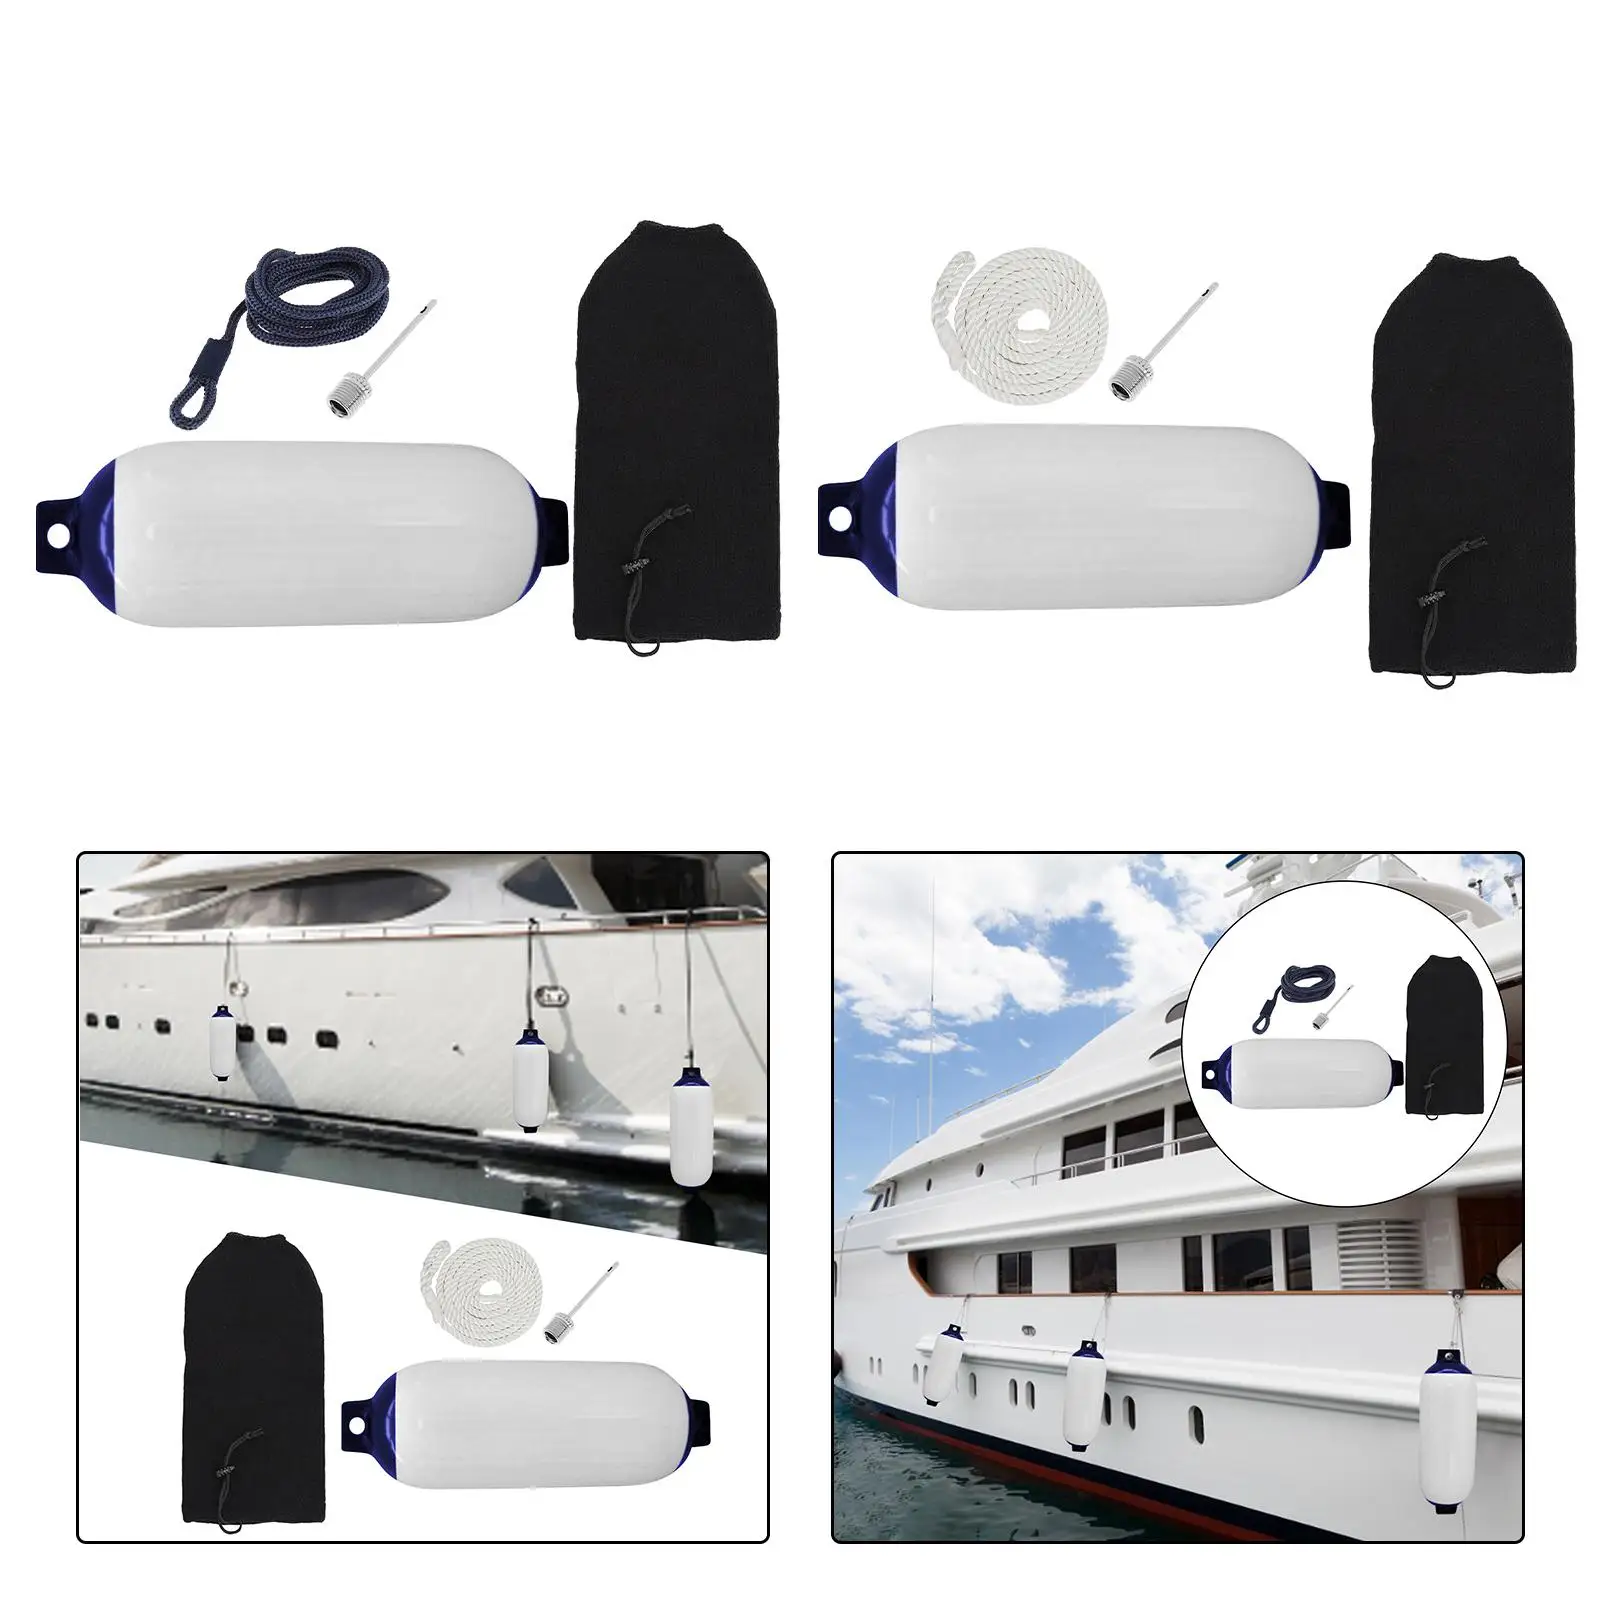 Boat Fender Accessories Use to Bass Boats Sport Boats Sailboats 11x40cm Durable Buoys Protector Boat Bumpers Fenders with Rope